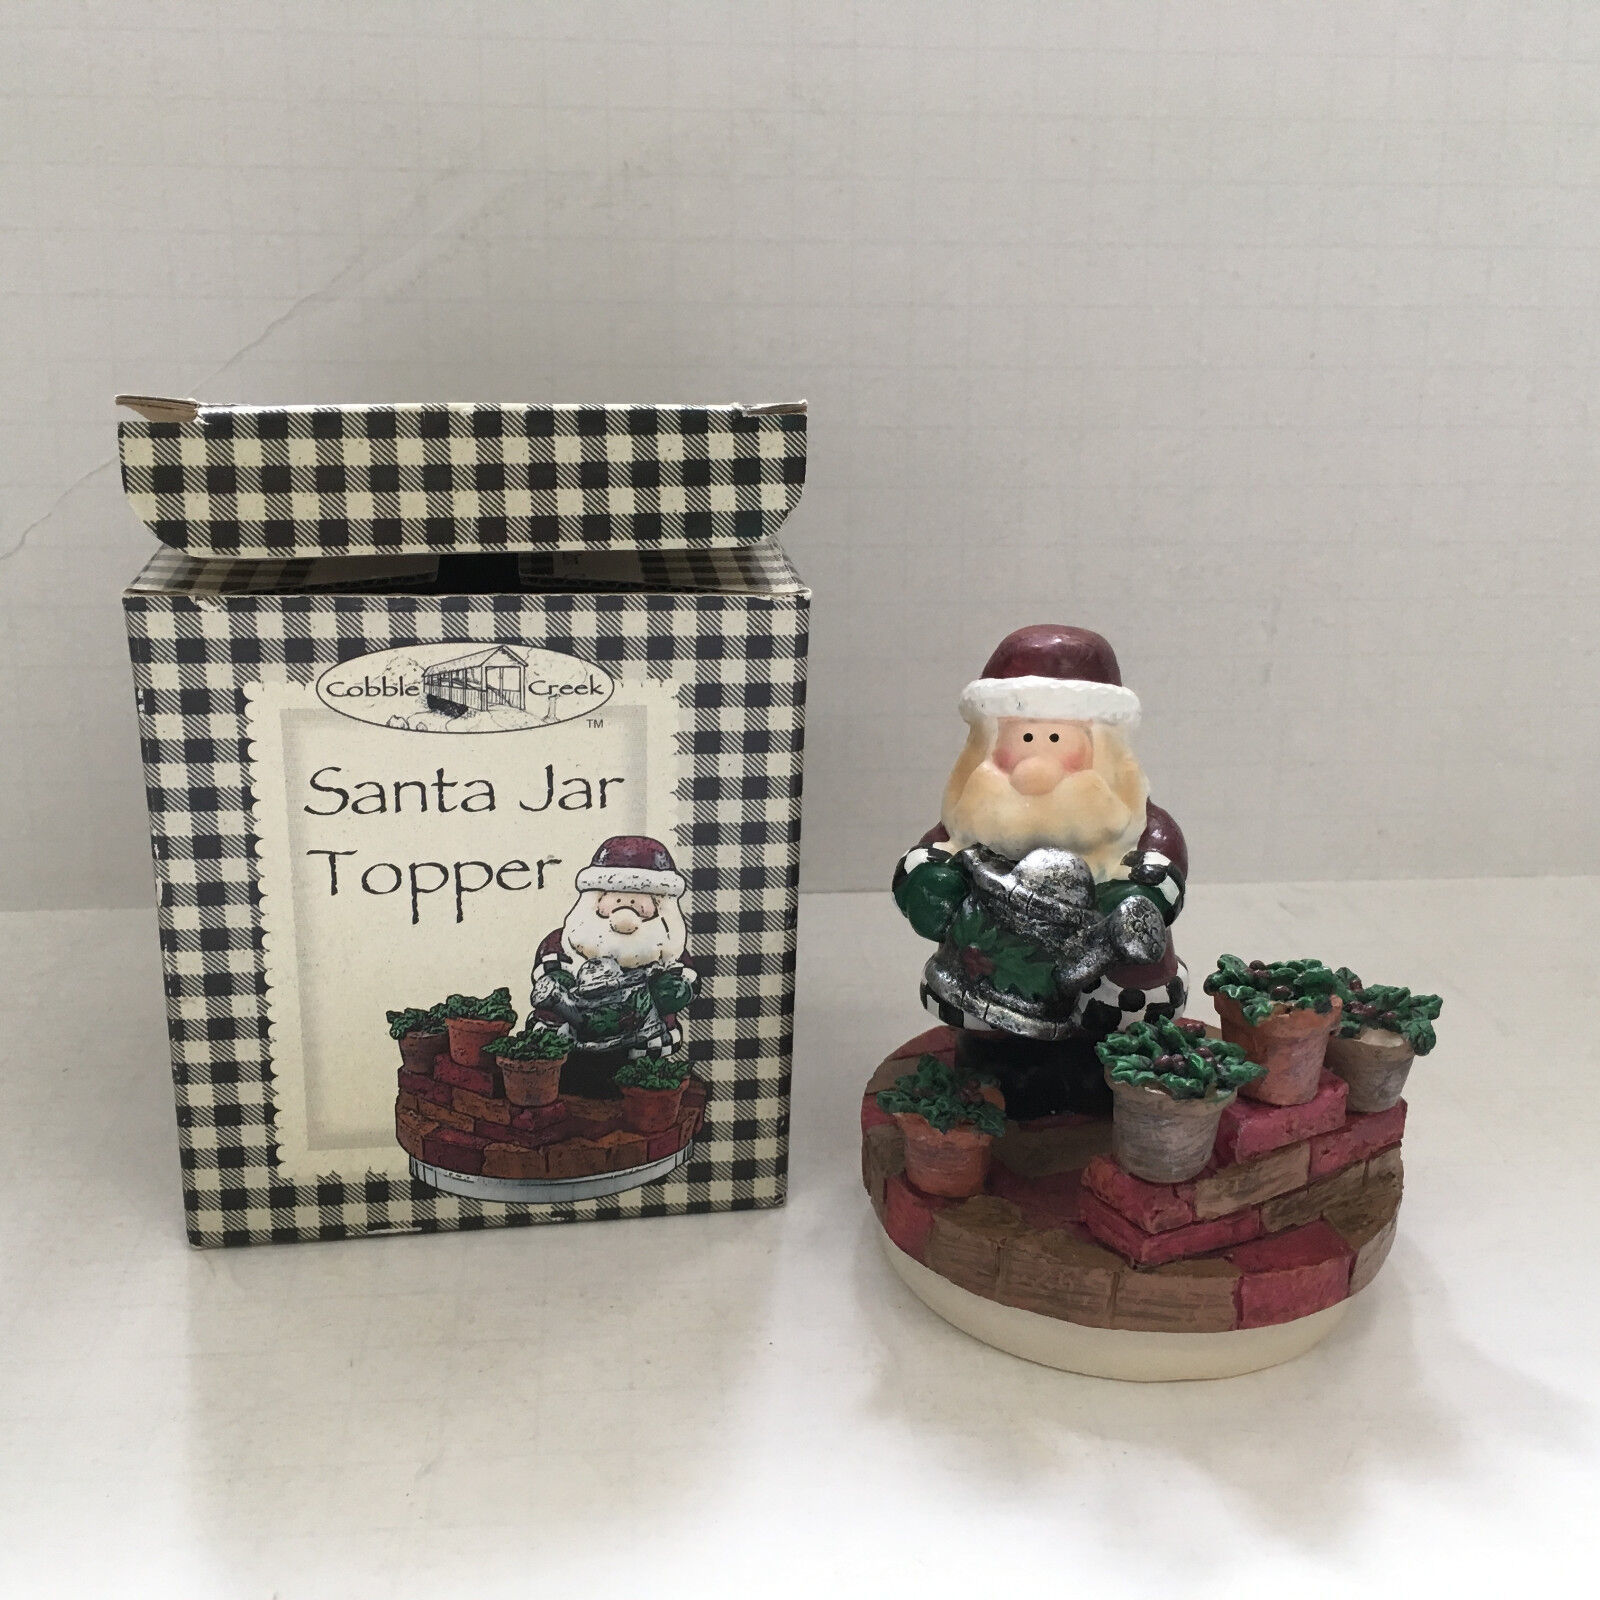 Primary image for Santa Jar topper decorative top for candle jar Santa watering poinsetta plants